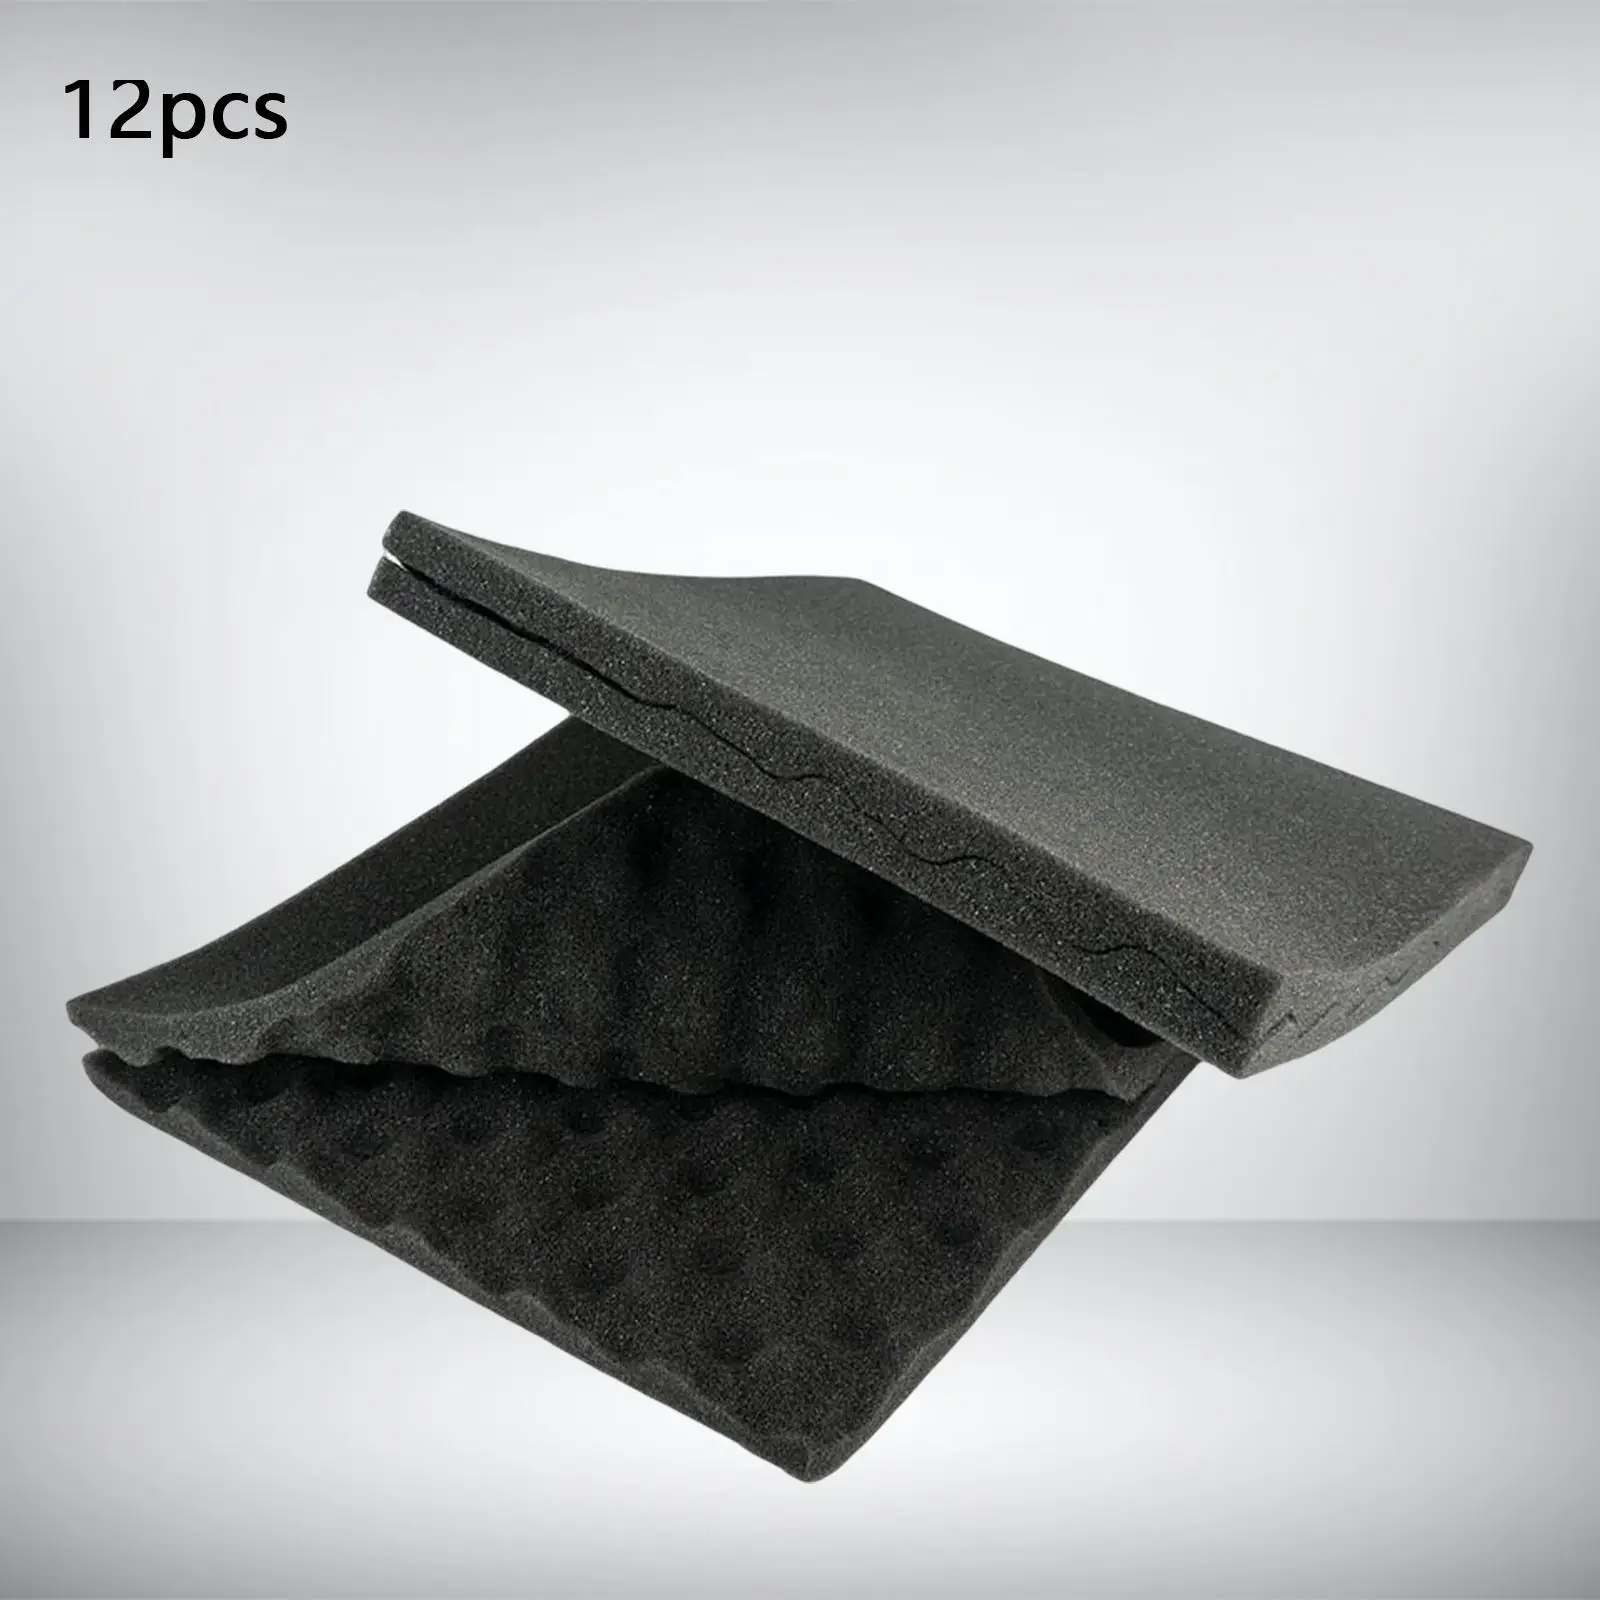 12Pcs Acoustic Foam Soundproofing Reduce Noise Background Sound Panels Soundproofing Foam Sound Panels Wedges for Ceiling Home